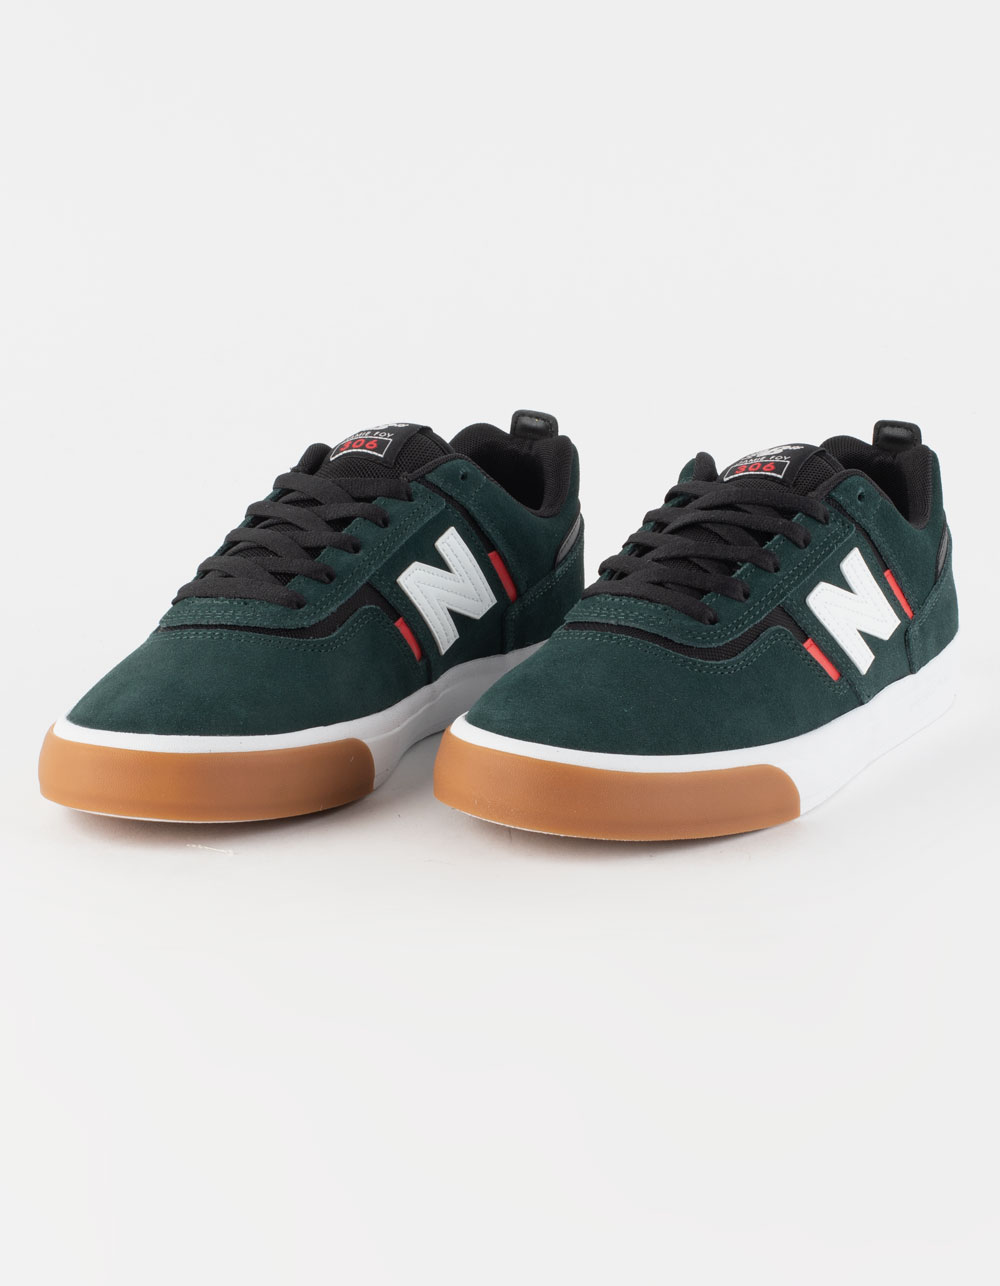 BALANCE Numeric Jamie Foy 306 Mens Shoes - FOREST | Tillys